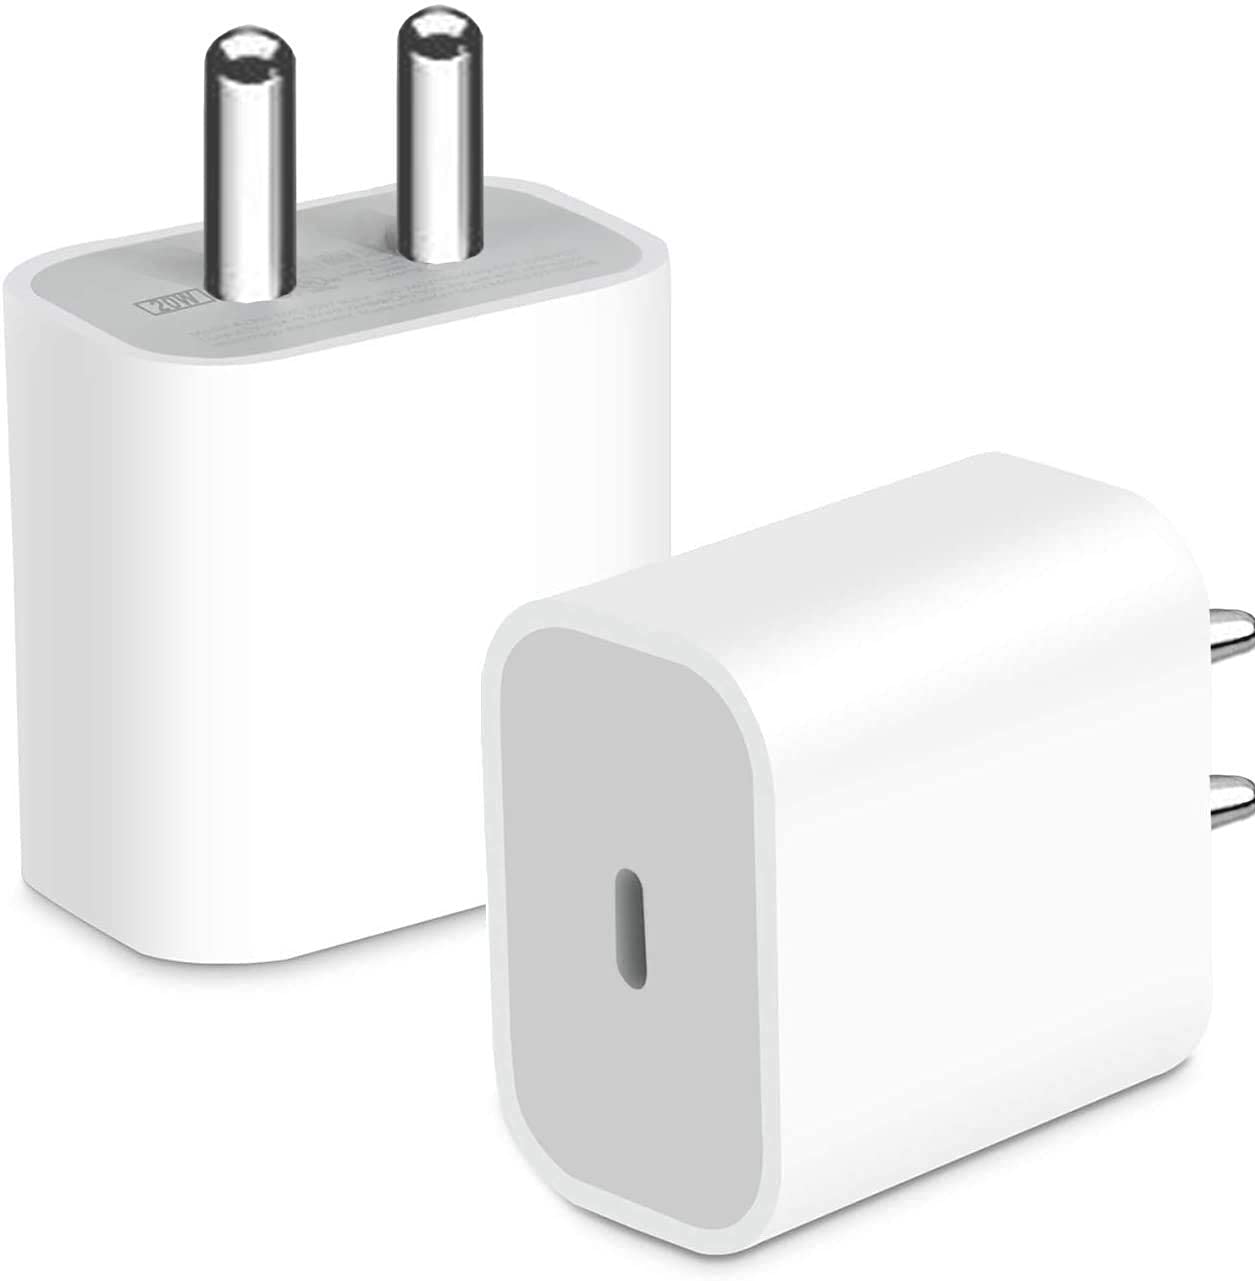 KINETIC USB (C) 20W CHARGER POWER ADAPTER USE FOR APPLE MOBILE (Model -kt06)